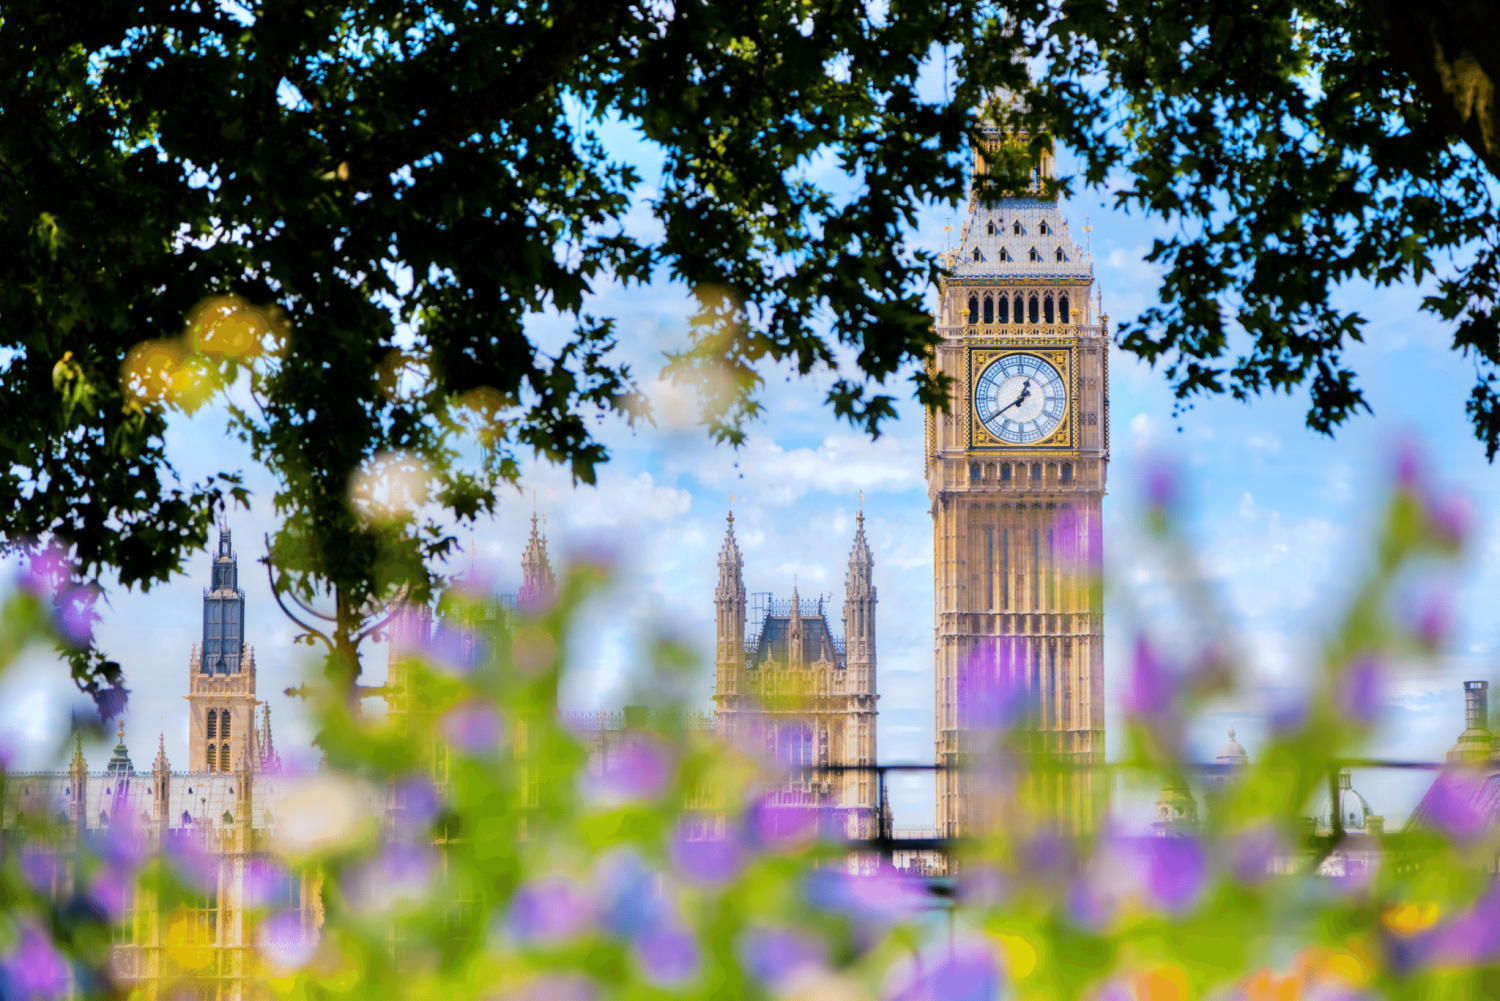 The Ultimate London Bucket List: 50+ Things to Do in London, England